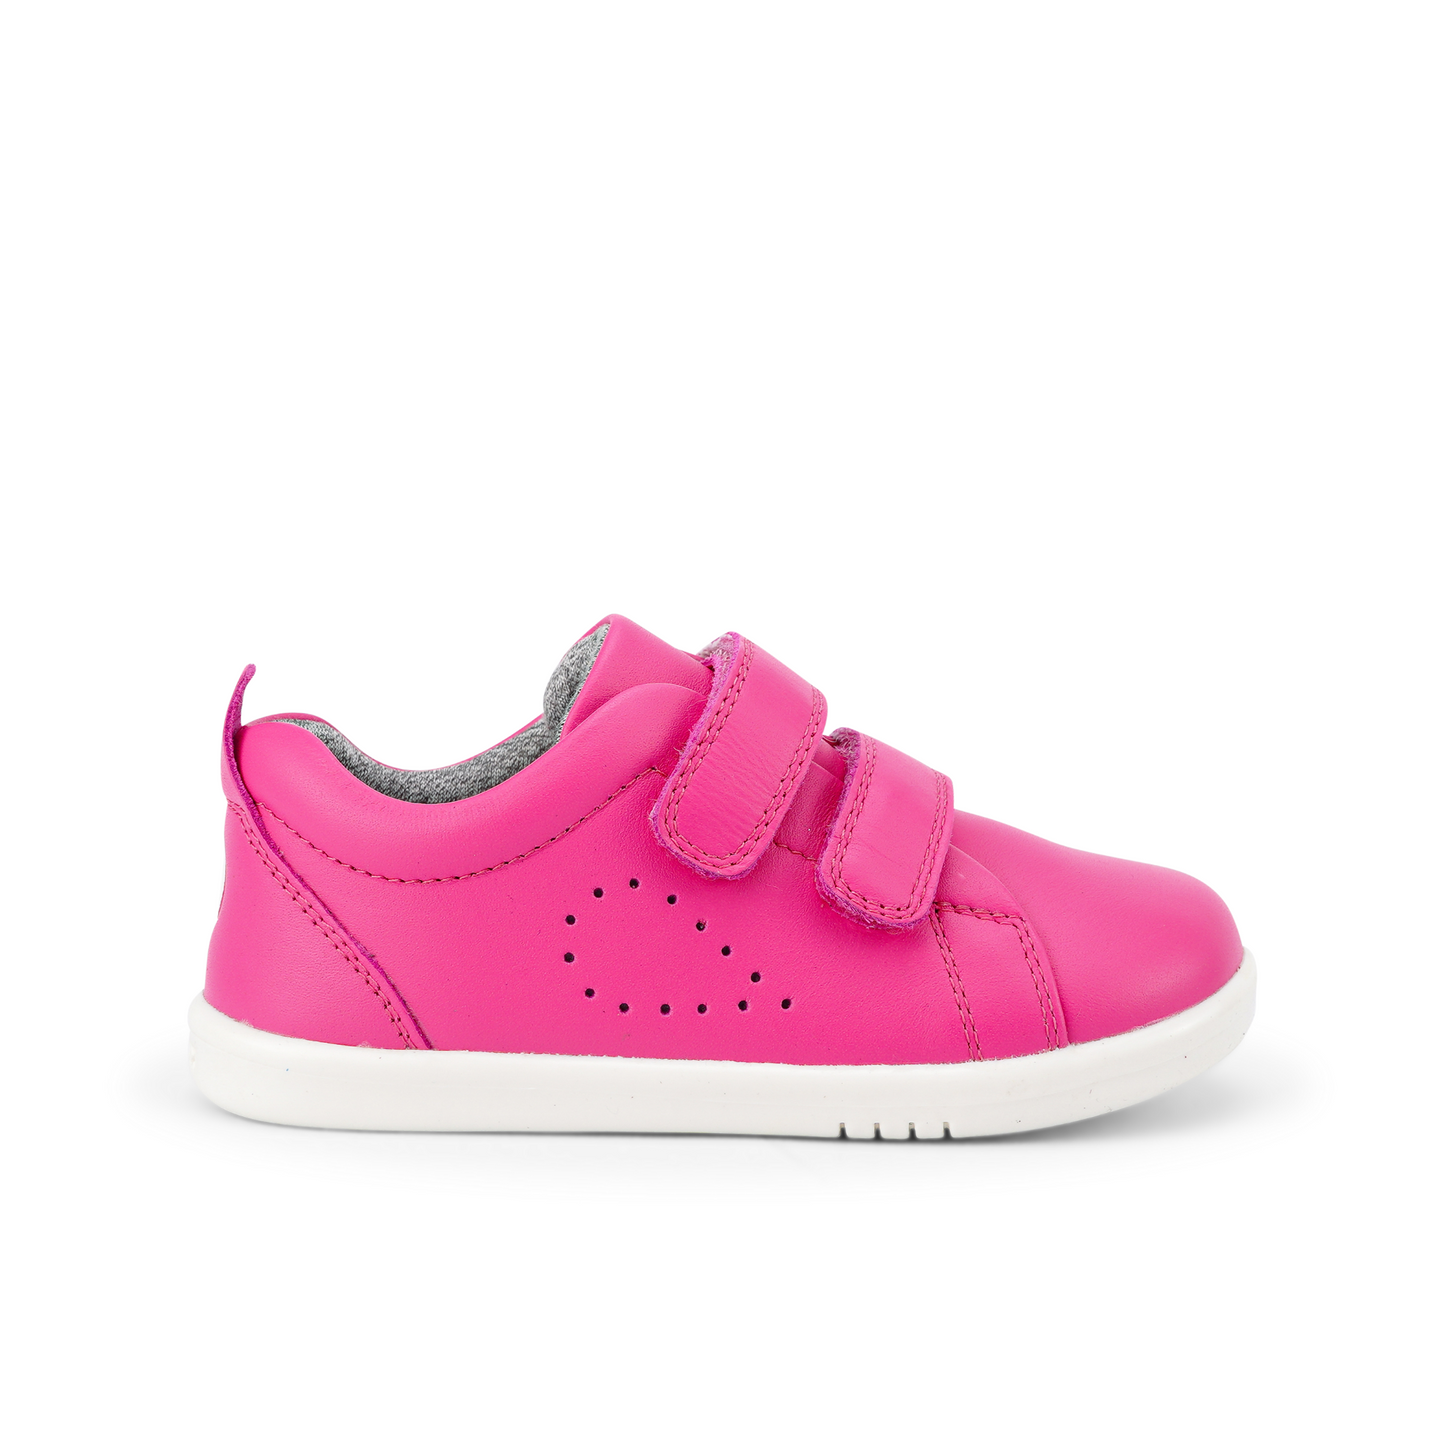 IW Grass Court Shoe in Fuchsia Pink Leather